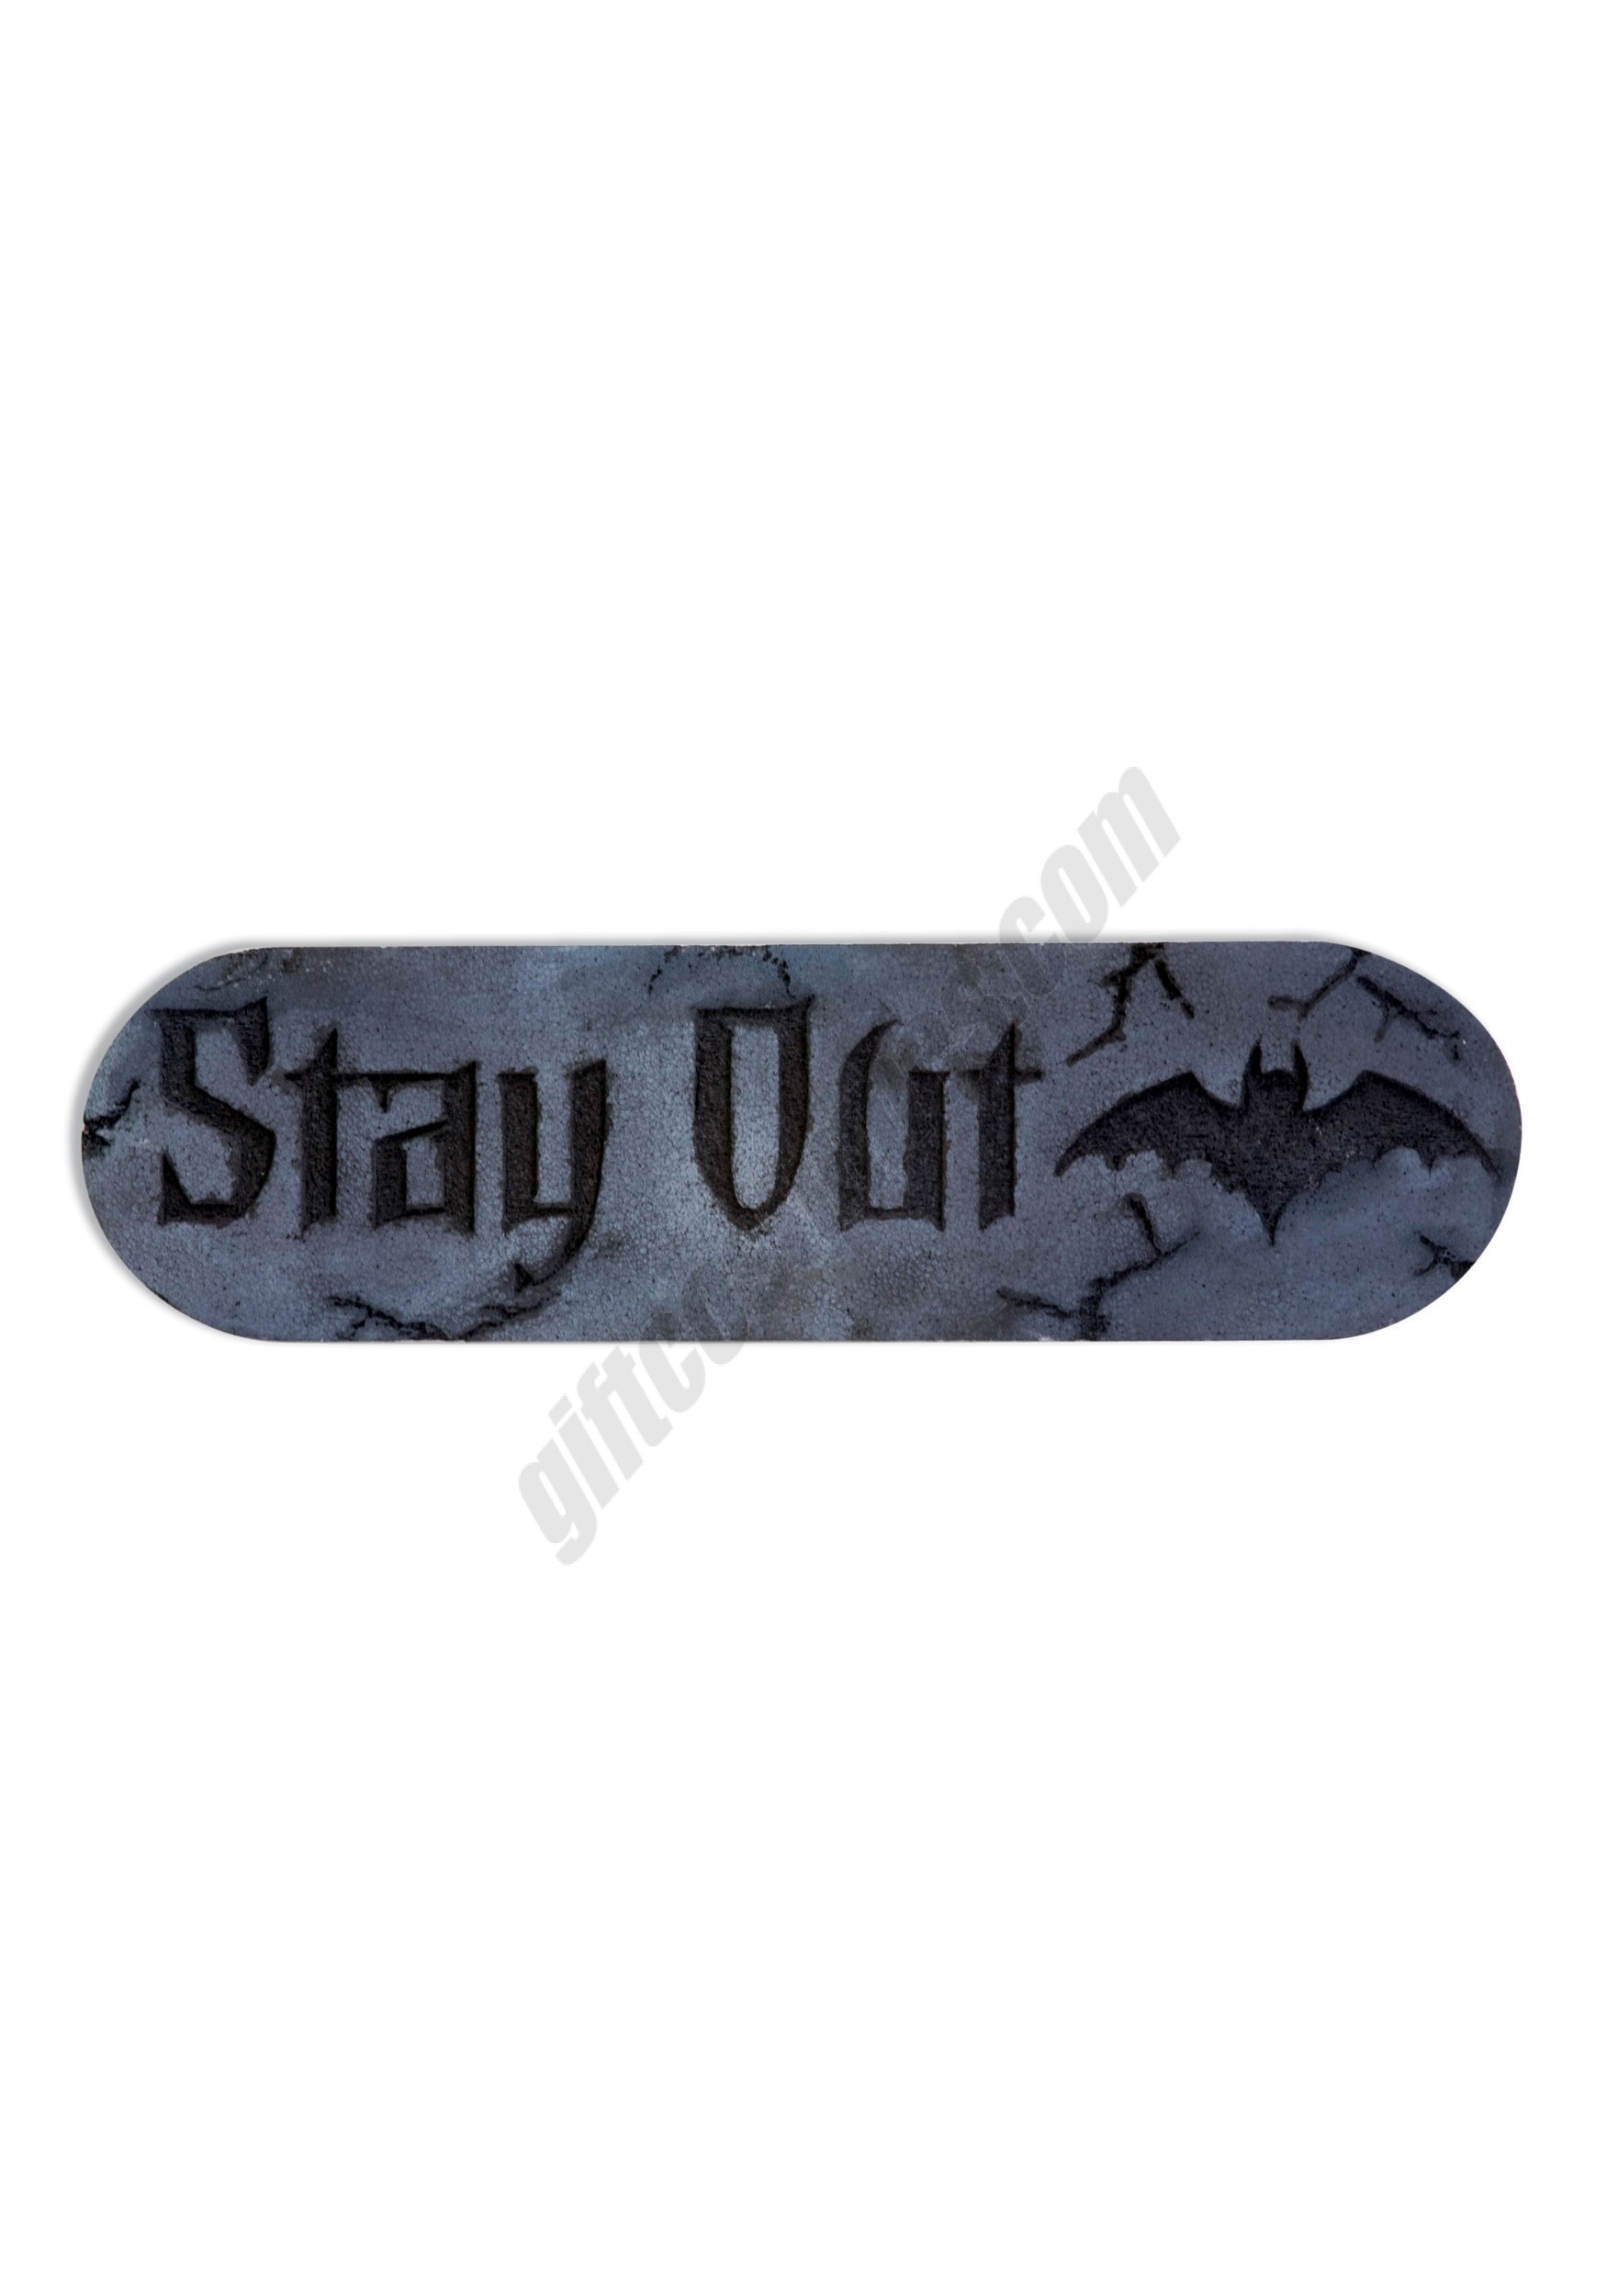 18" Stay Out Foam Sign Decoration Promotions - 18" Stay Out Foam Sign Decoration Promotions